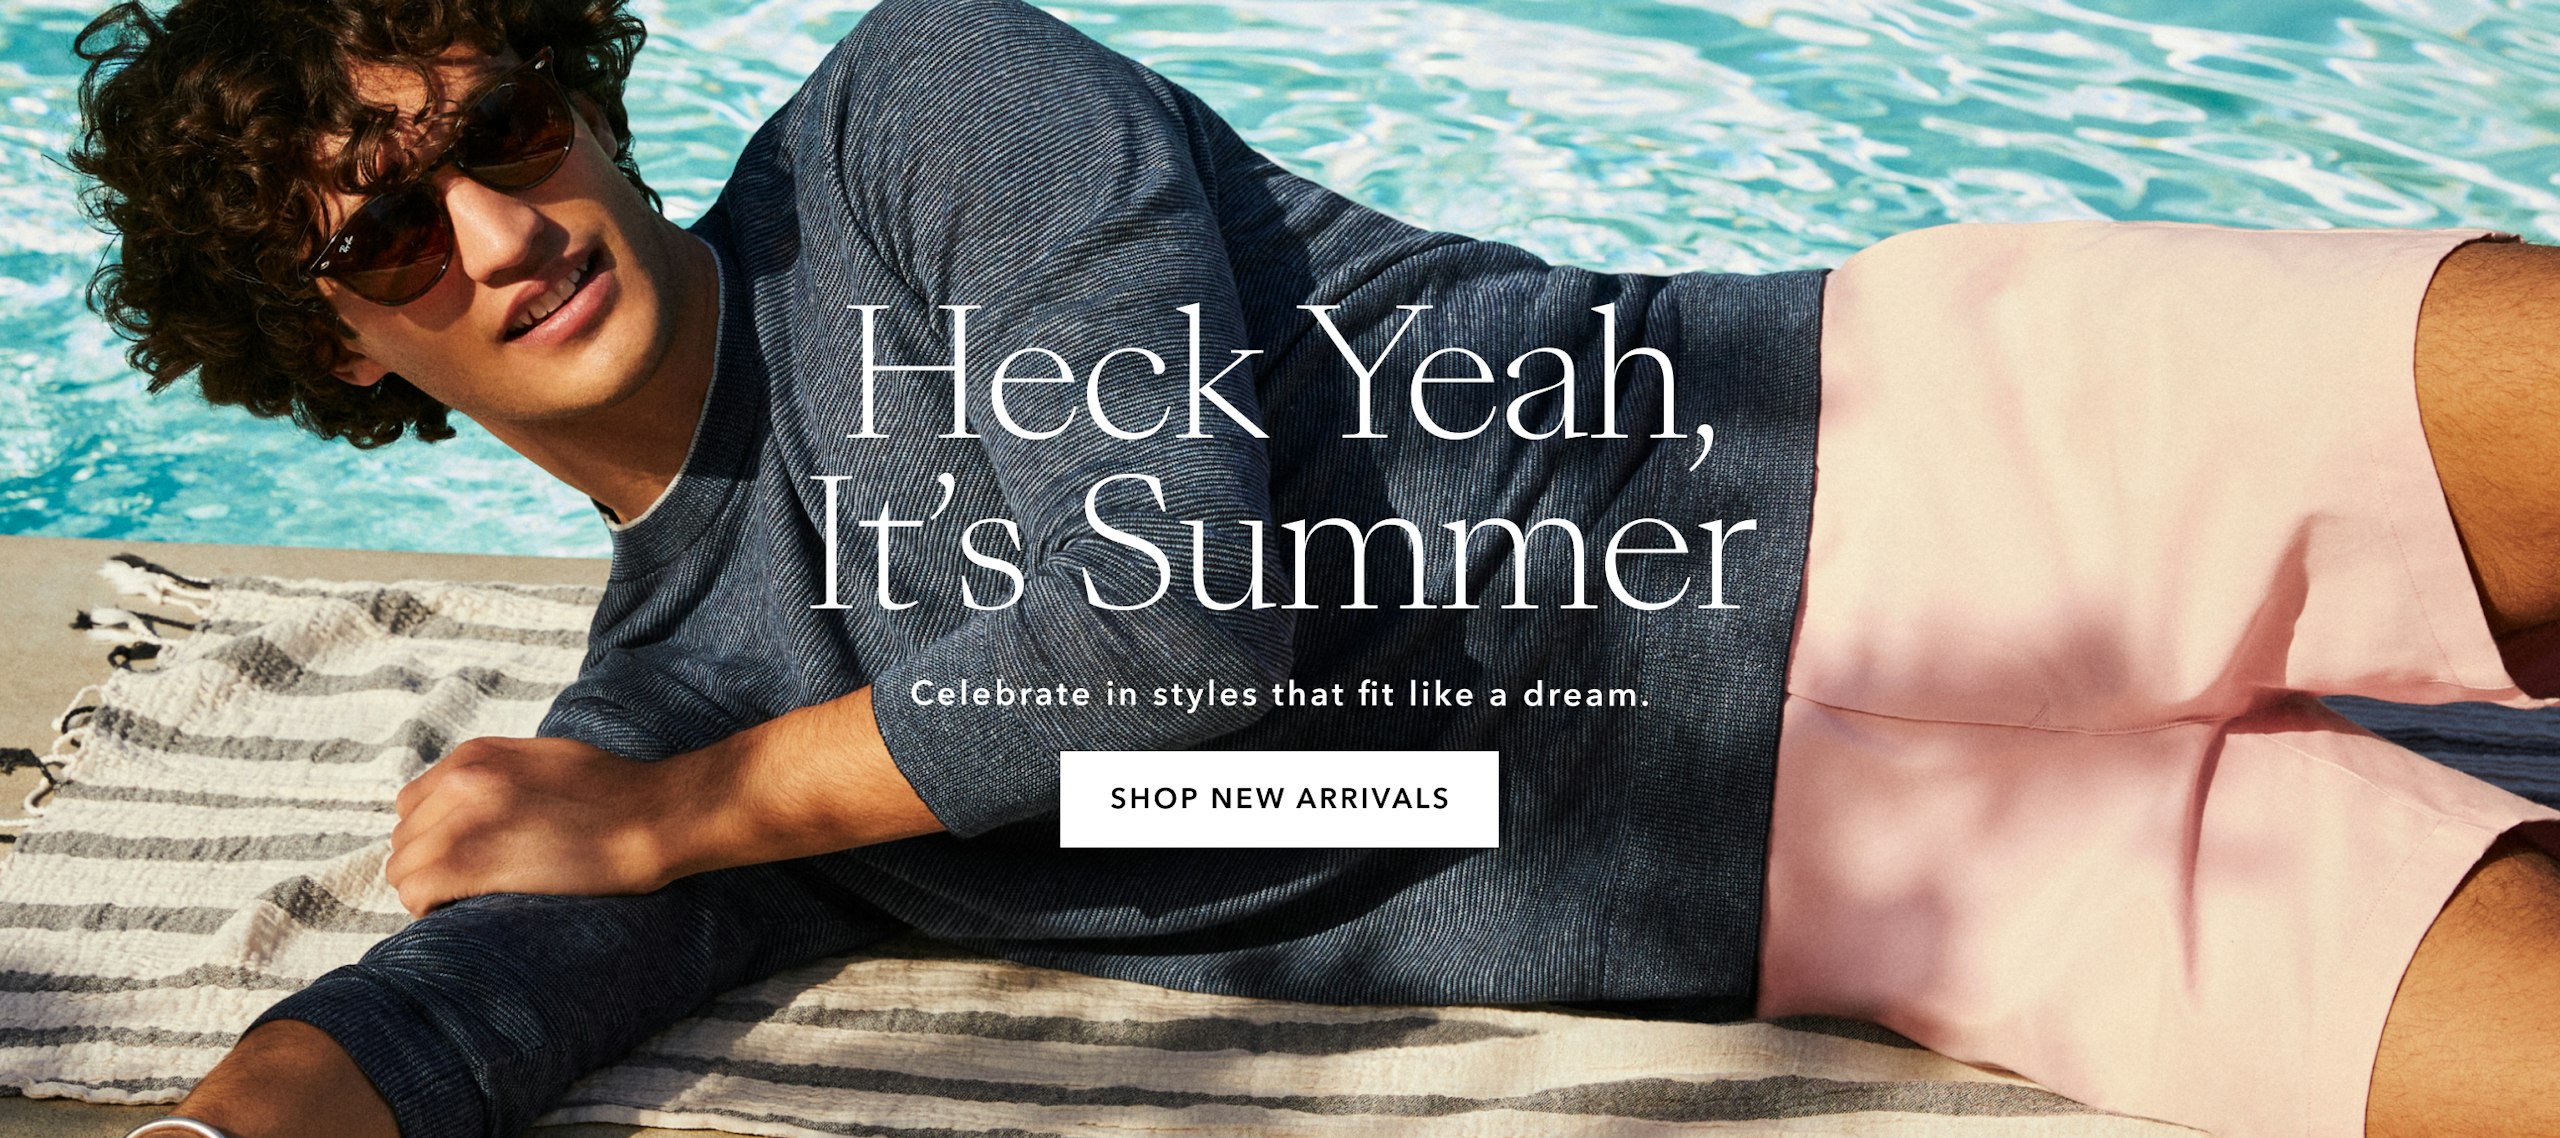 Text:HECK YEAH IT'S SUMMER. Celebrate the styles that fit like a dream. SHOP NEW ARRIVALS Image: Man sitting on towel  near the pool.